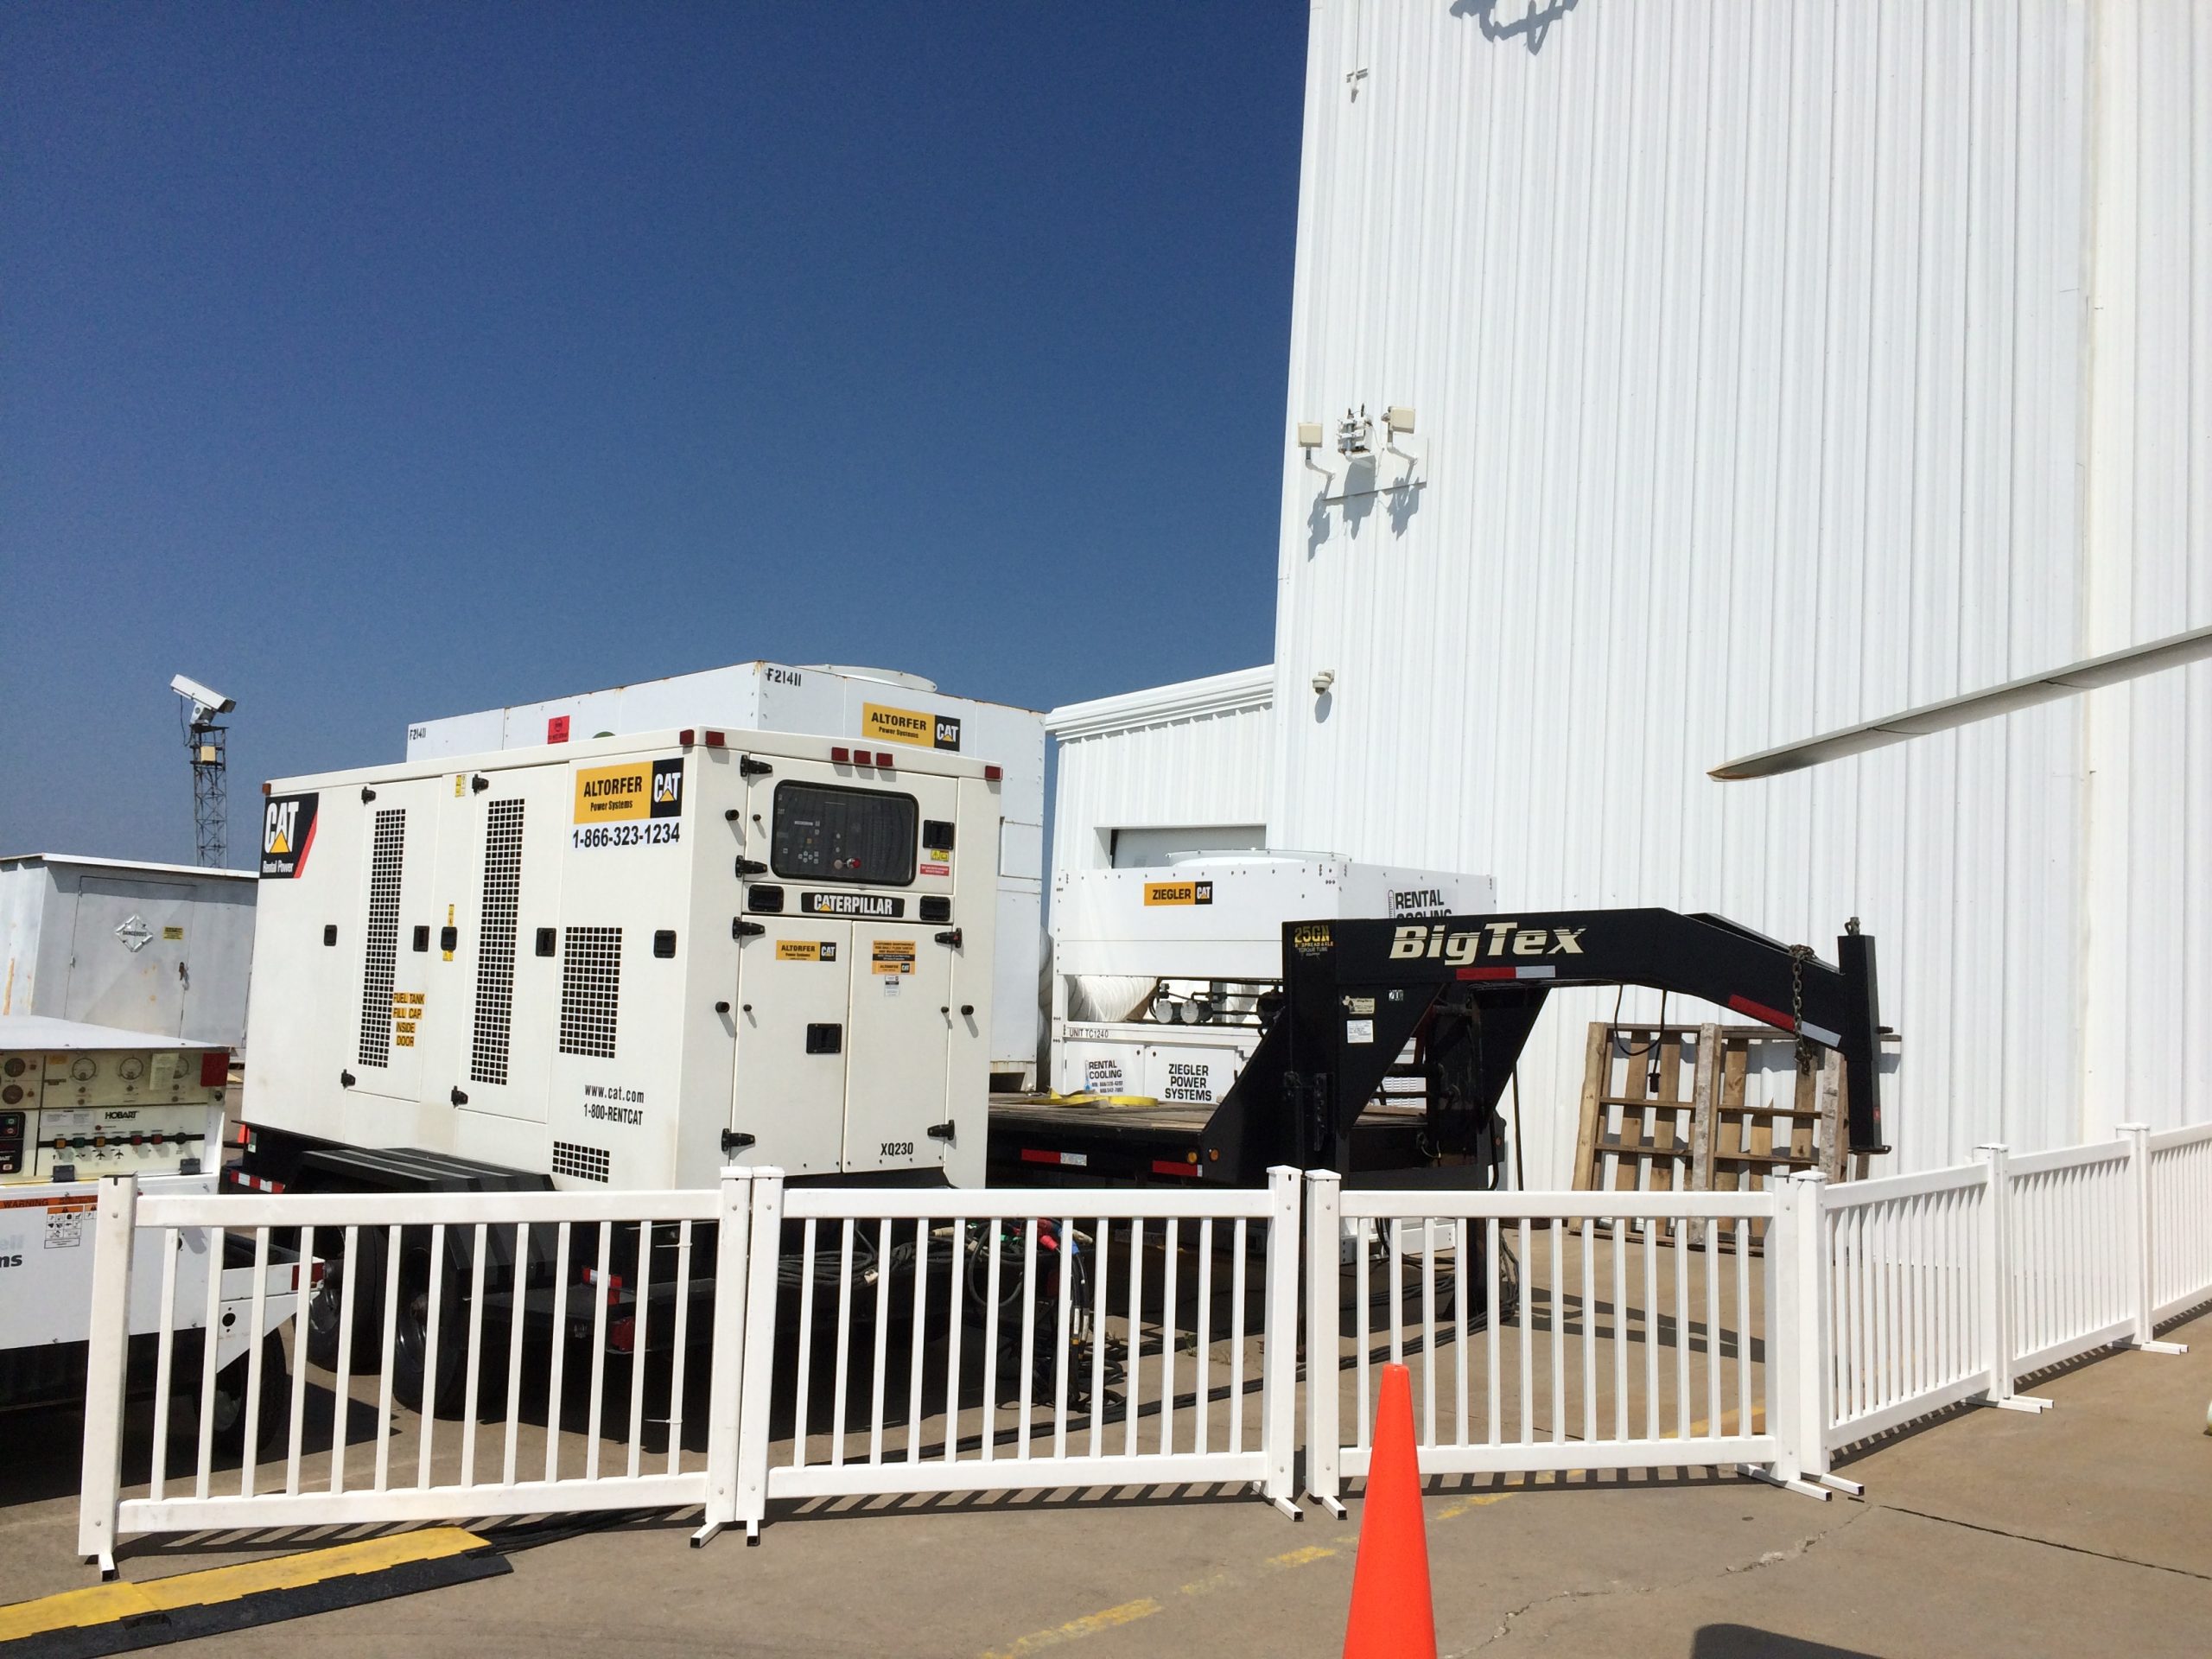 Temporary fencing around Generator and Air Conditioning units outside of airplane hangar